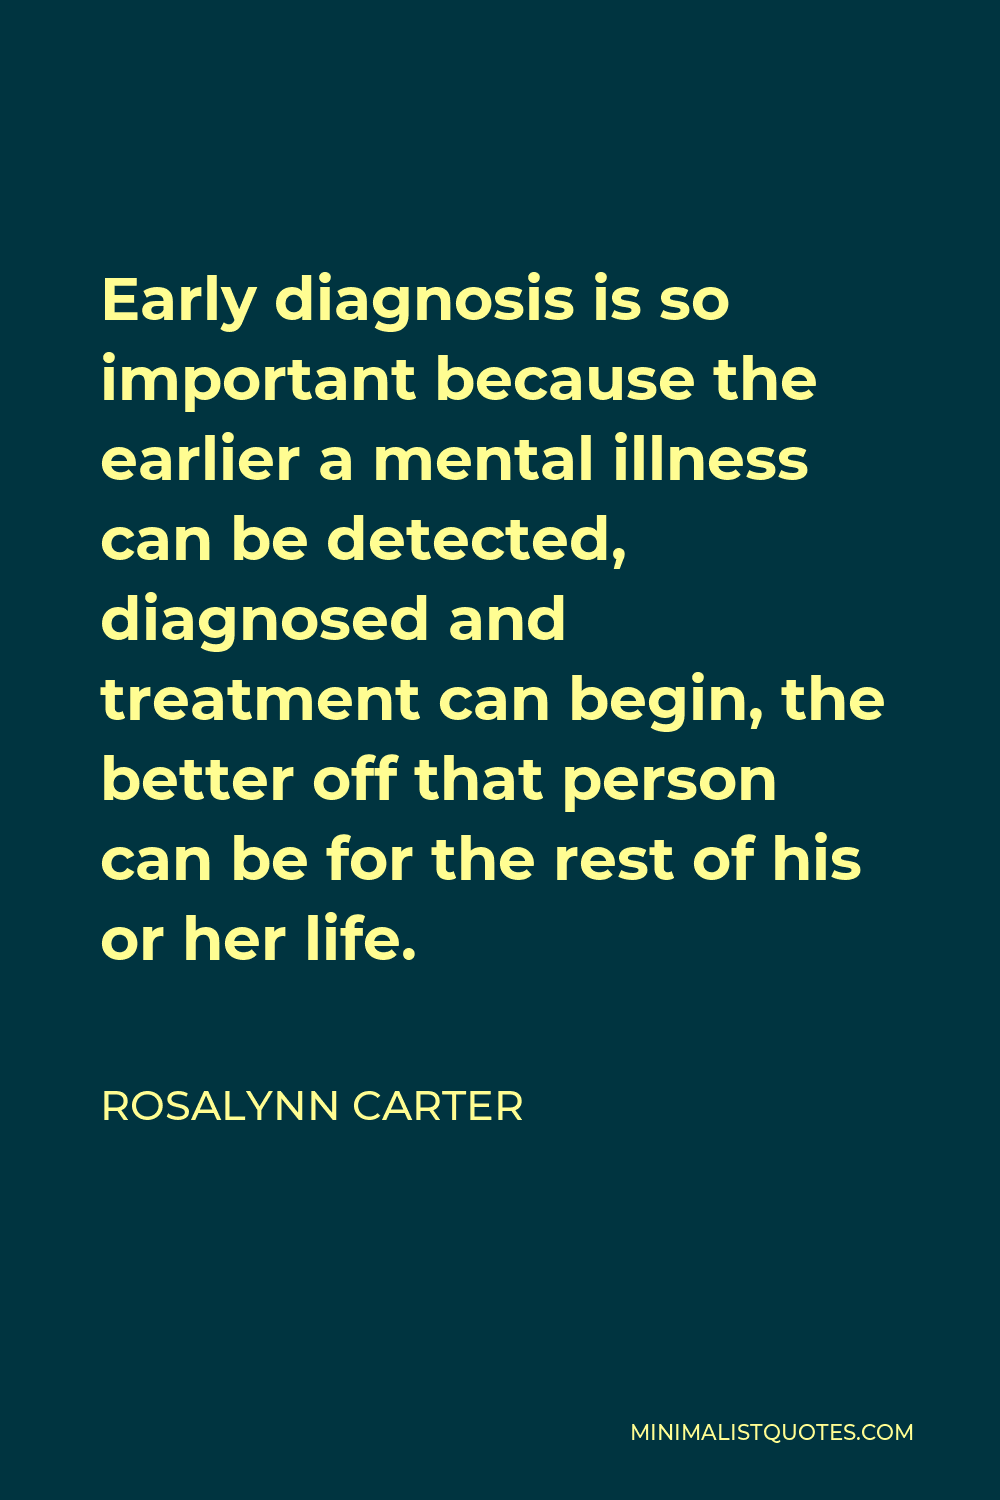 Rosalynn Carter Quote - Early diagnosis is so important because the earlier a mental illness can be detected, diagnosed and treatment can begin, the better off that person can be for the rest of his or her life.